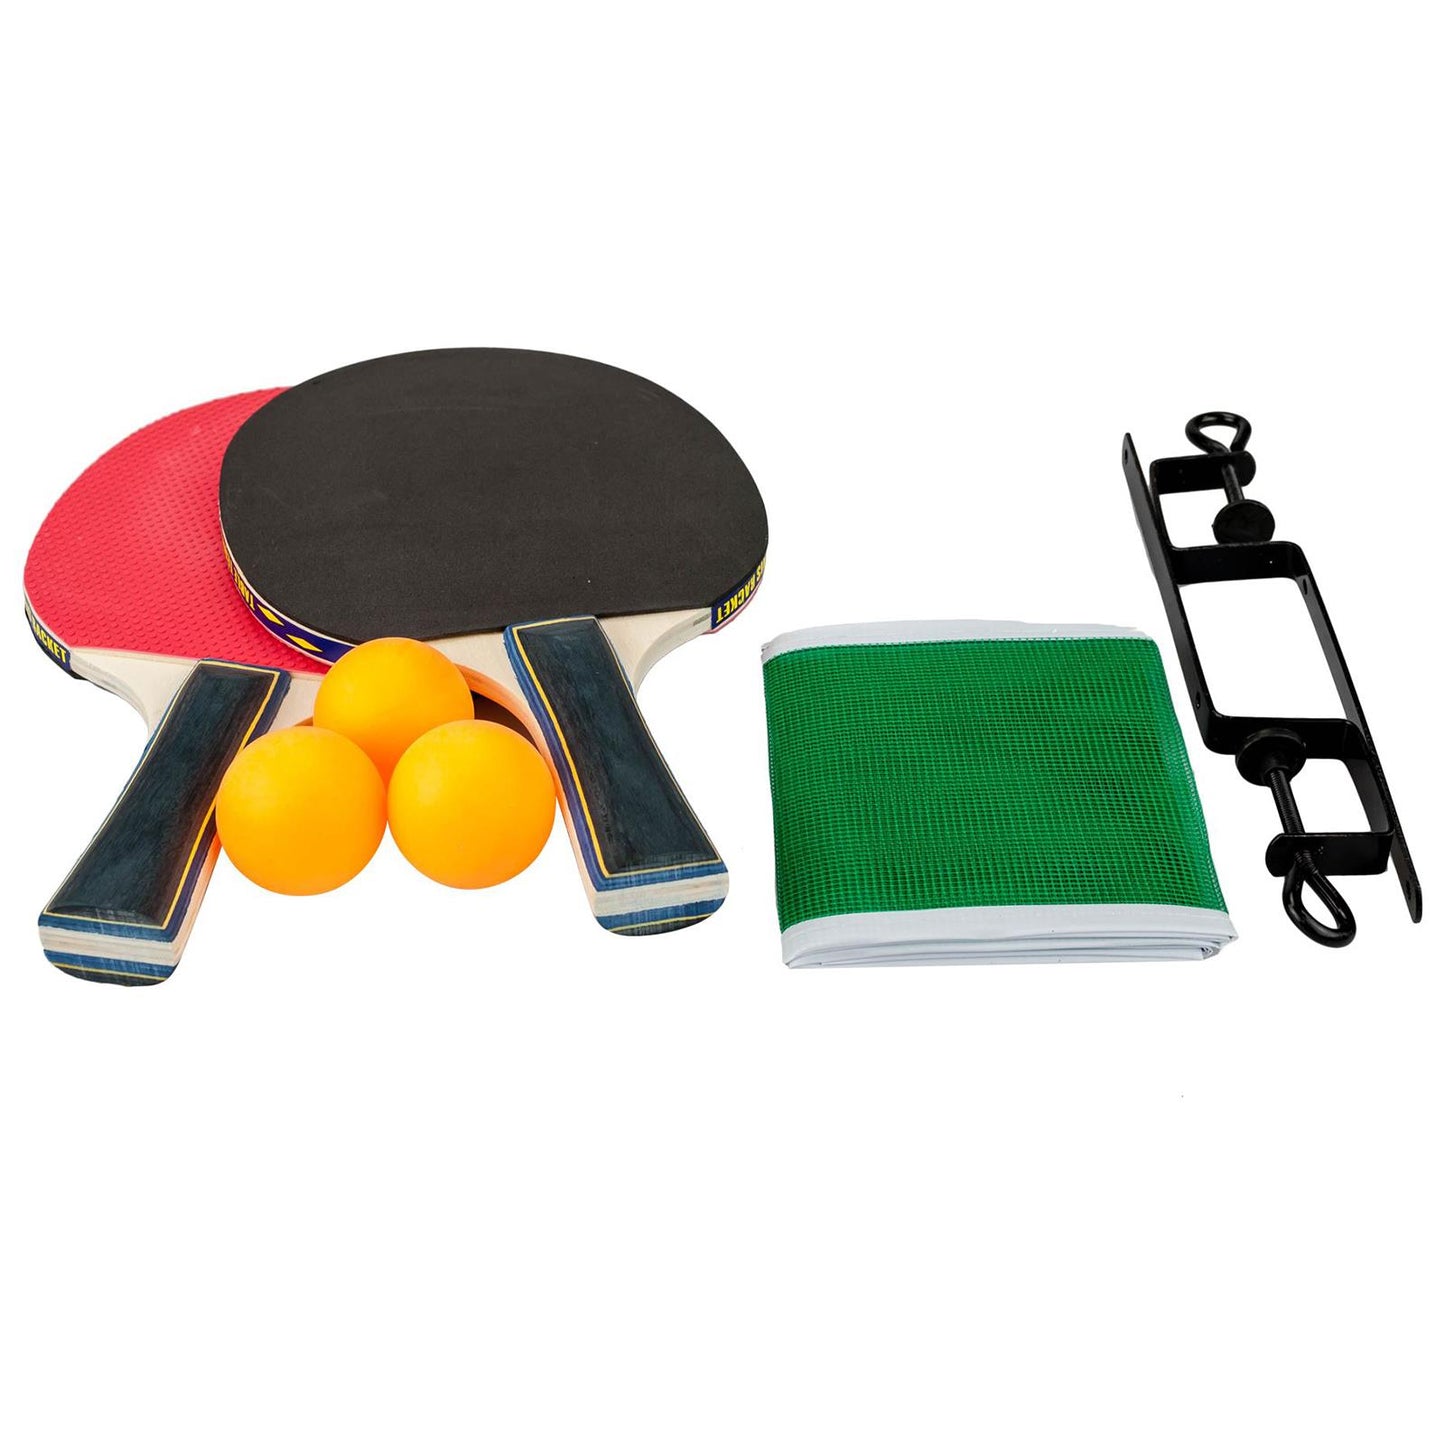 Ping Pong Table Set With Paddles And Balls